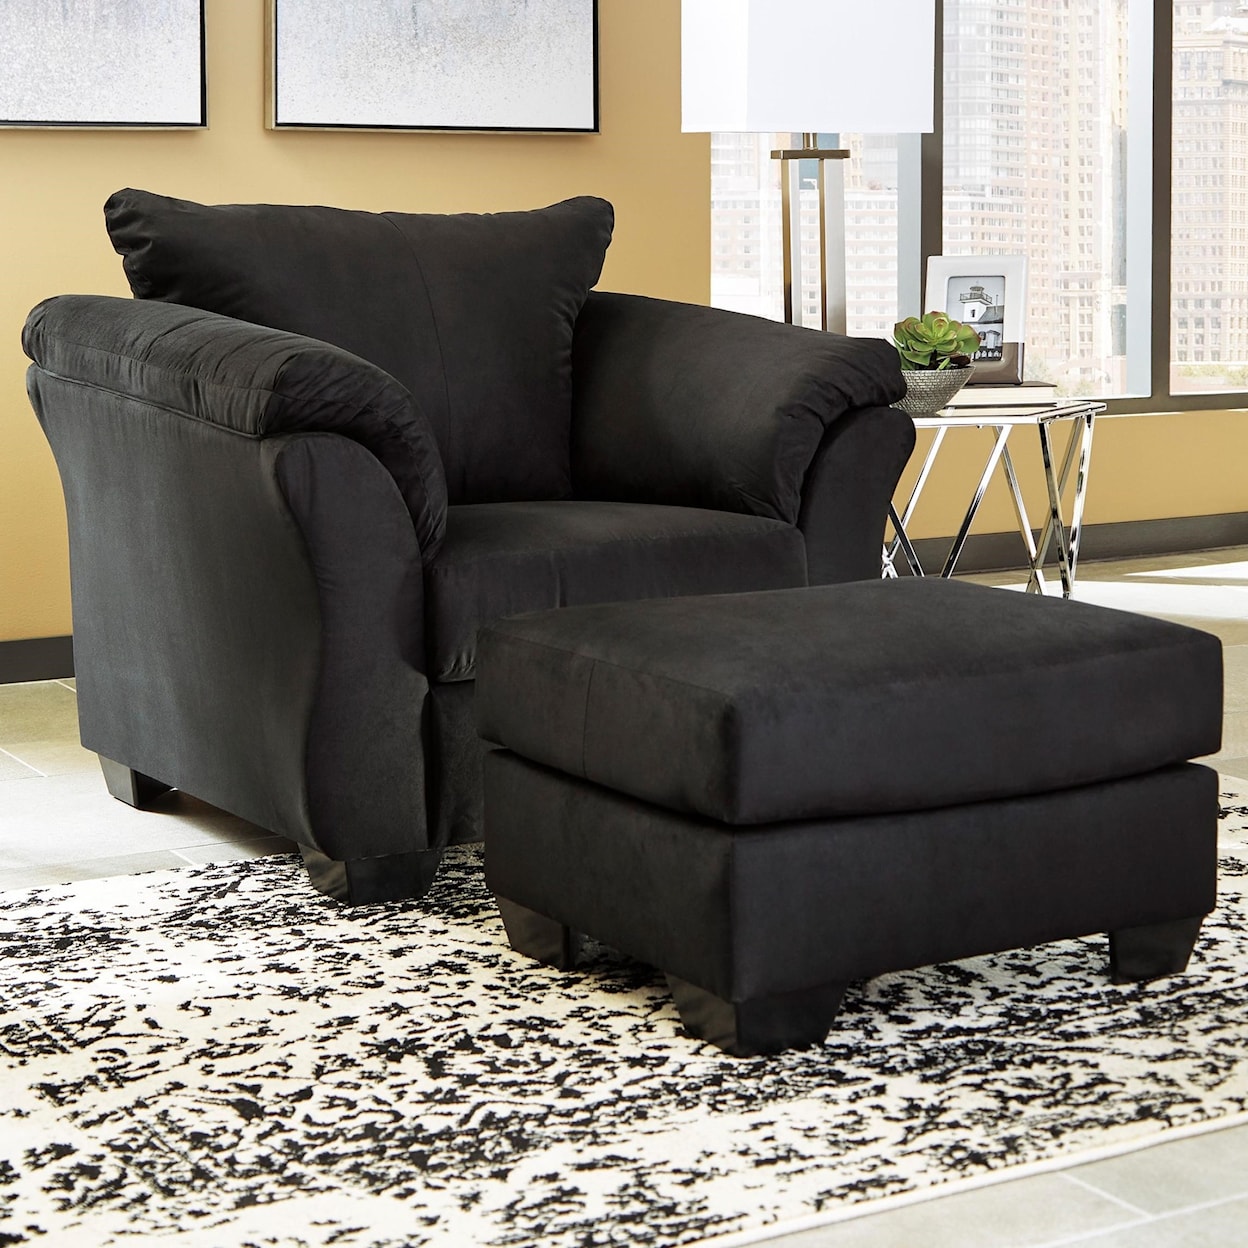 Signature Design by Ashley Furniture Darcy Upholstered Chair and Ottoman